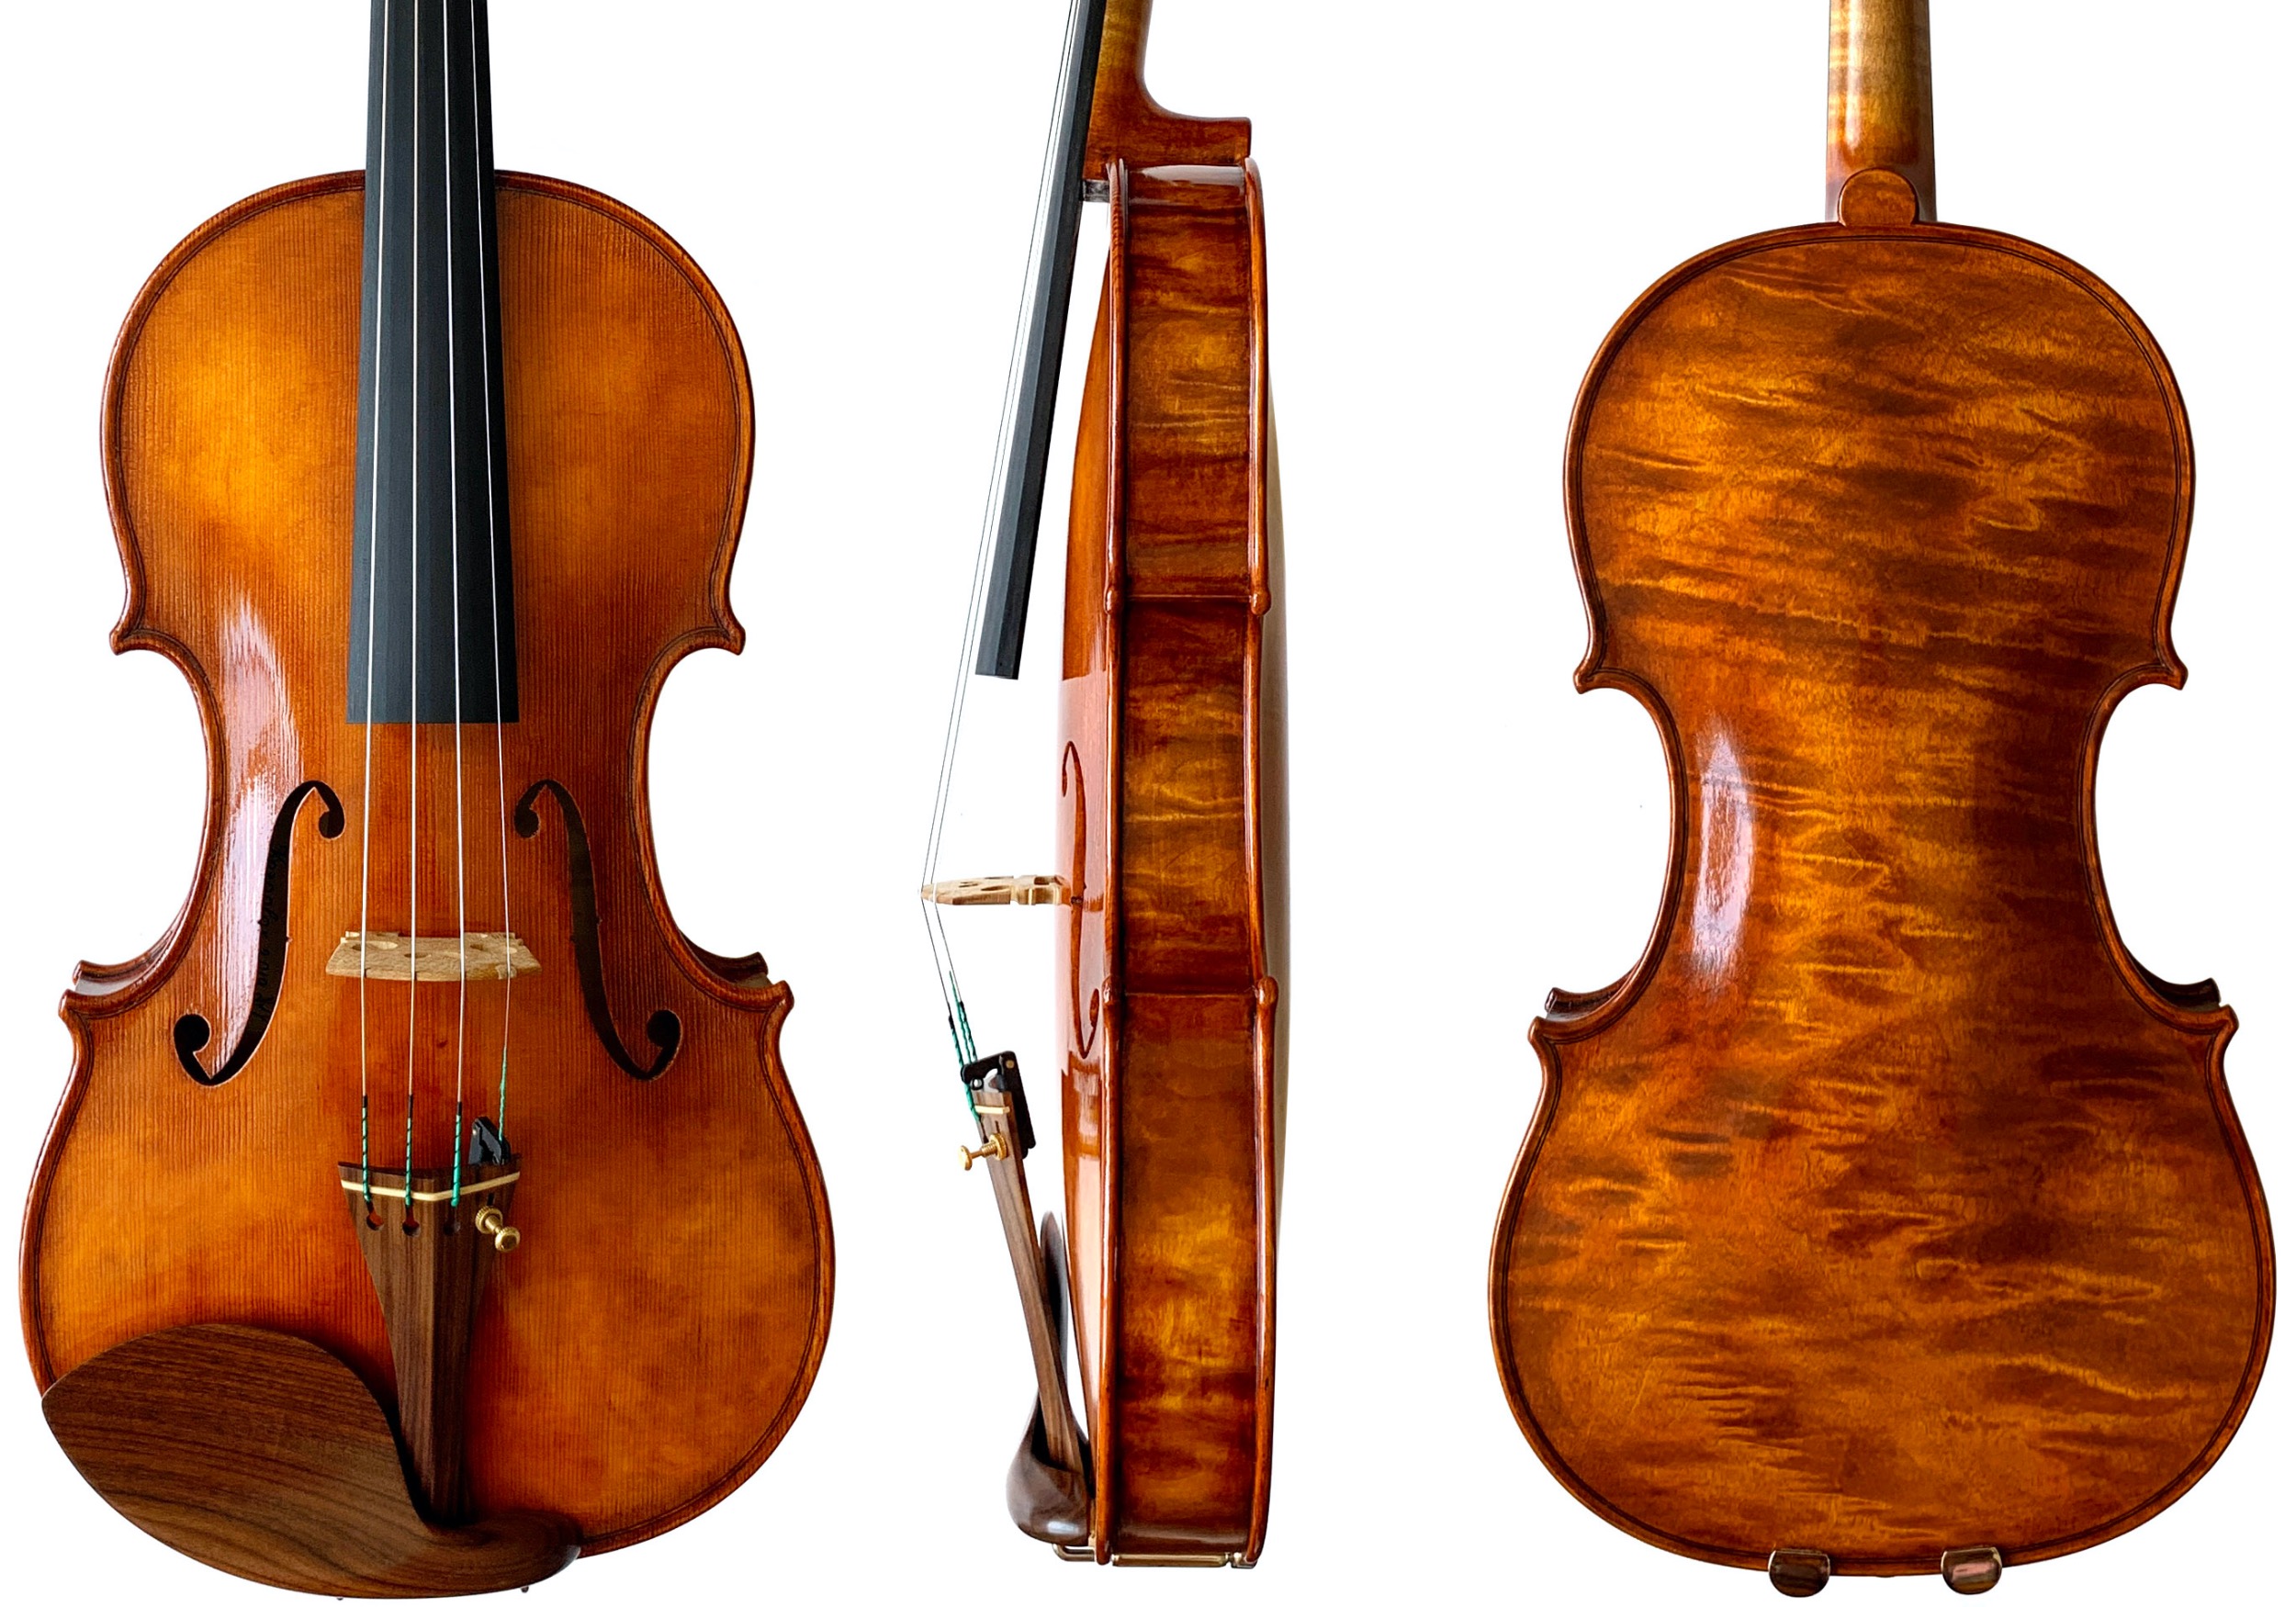 Moneff violin front, side and back